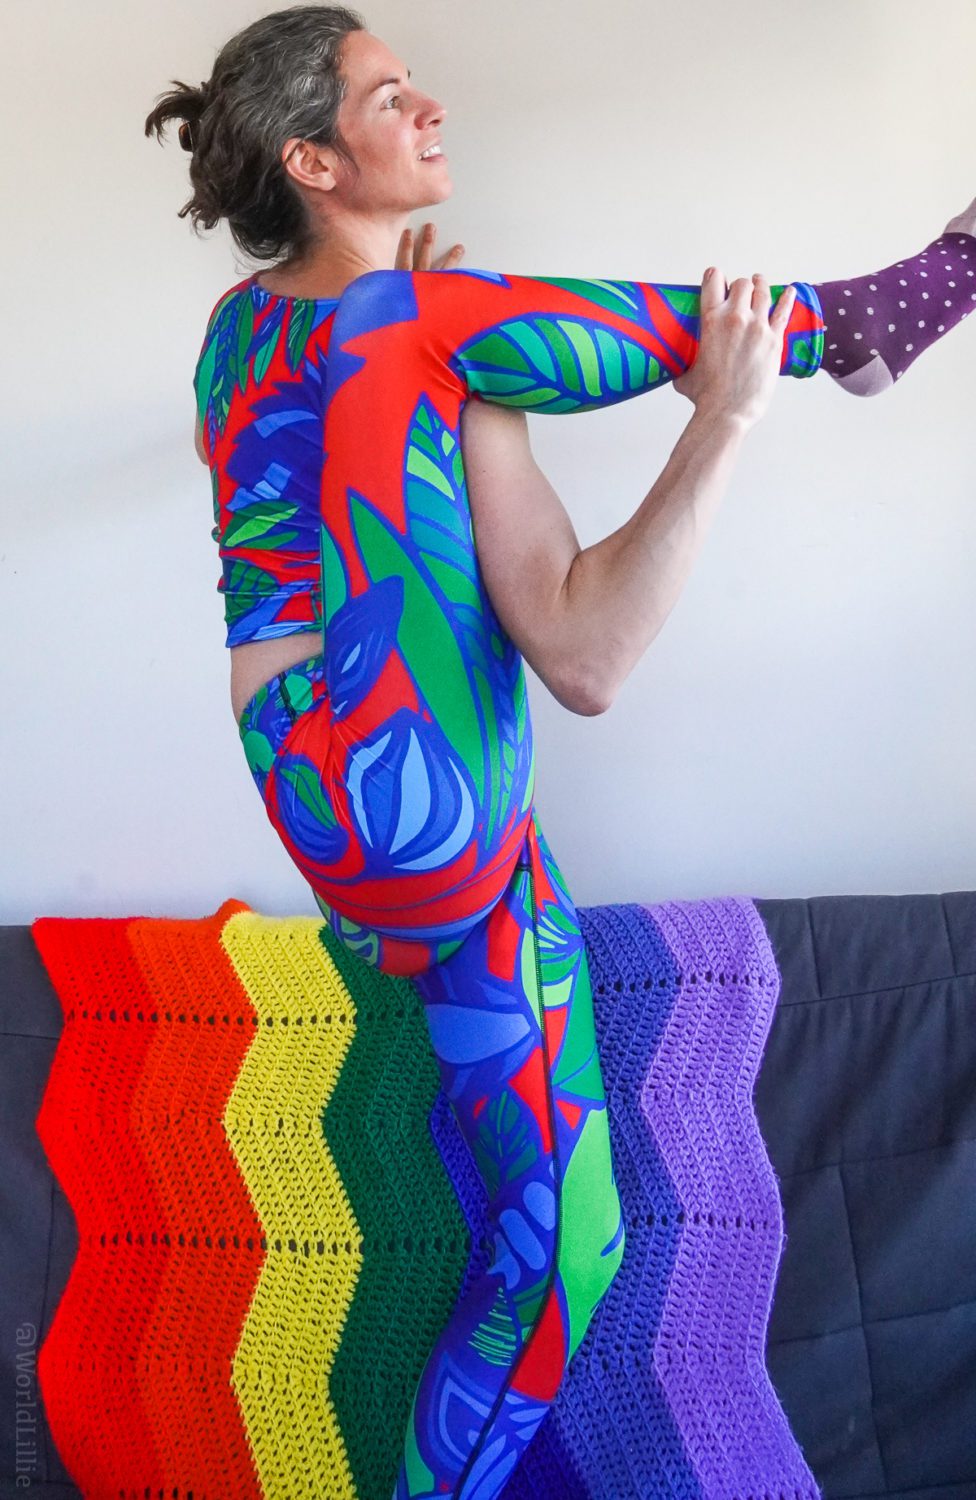 Flexibility with colorful leggings